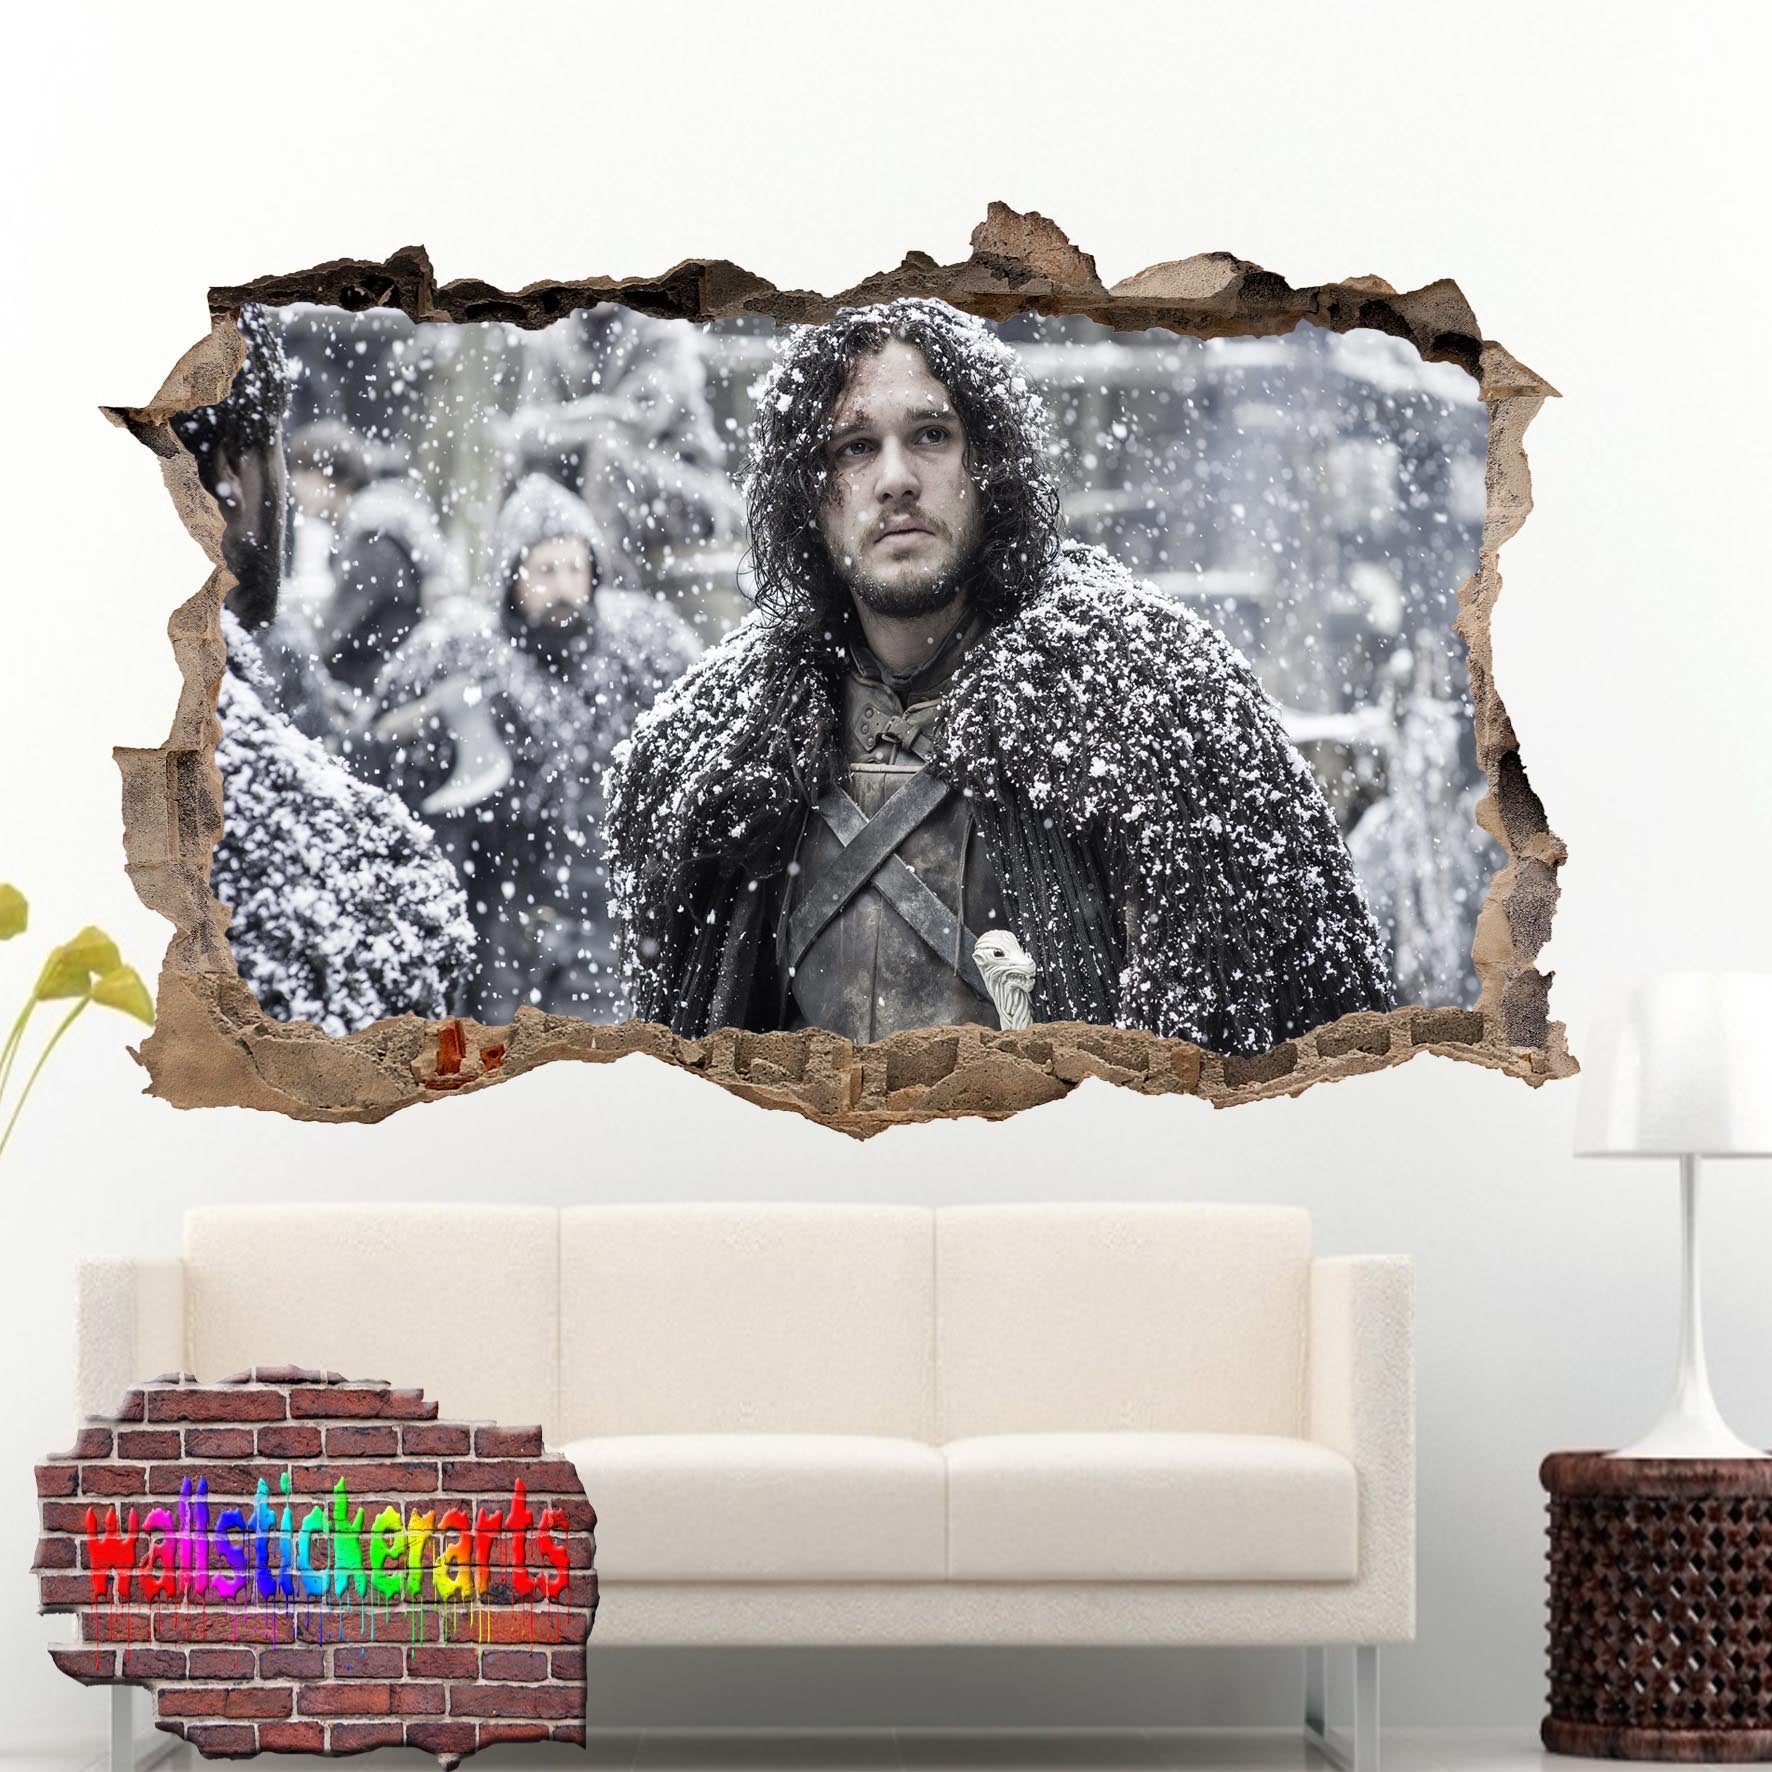 Game of Thrones Character Jon Snow wall sticker poster decal mural